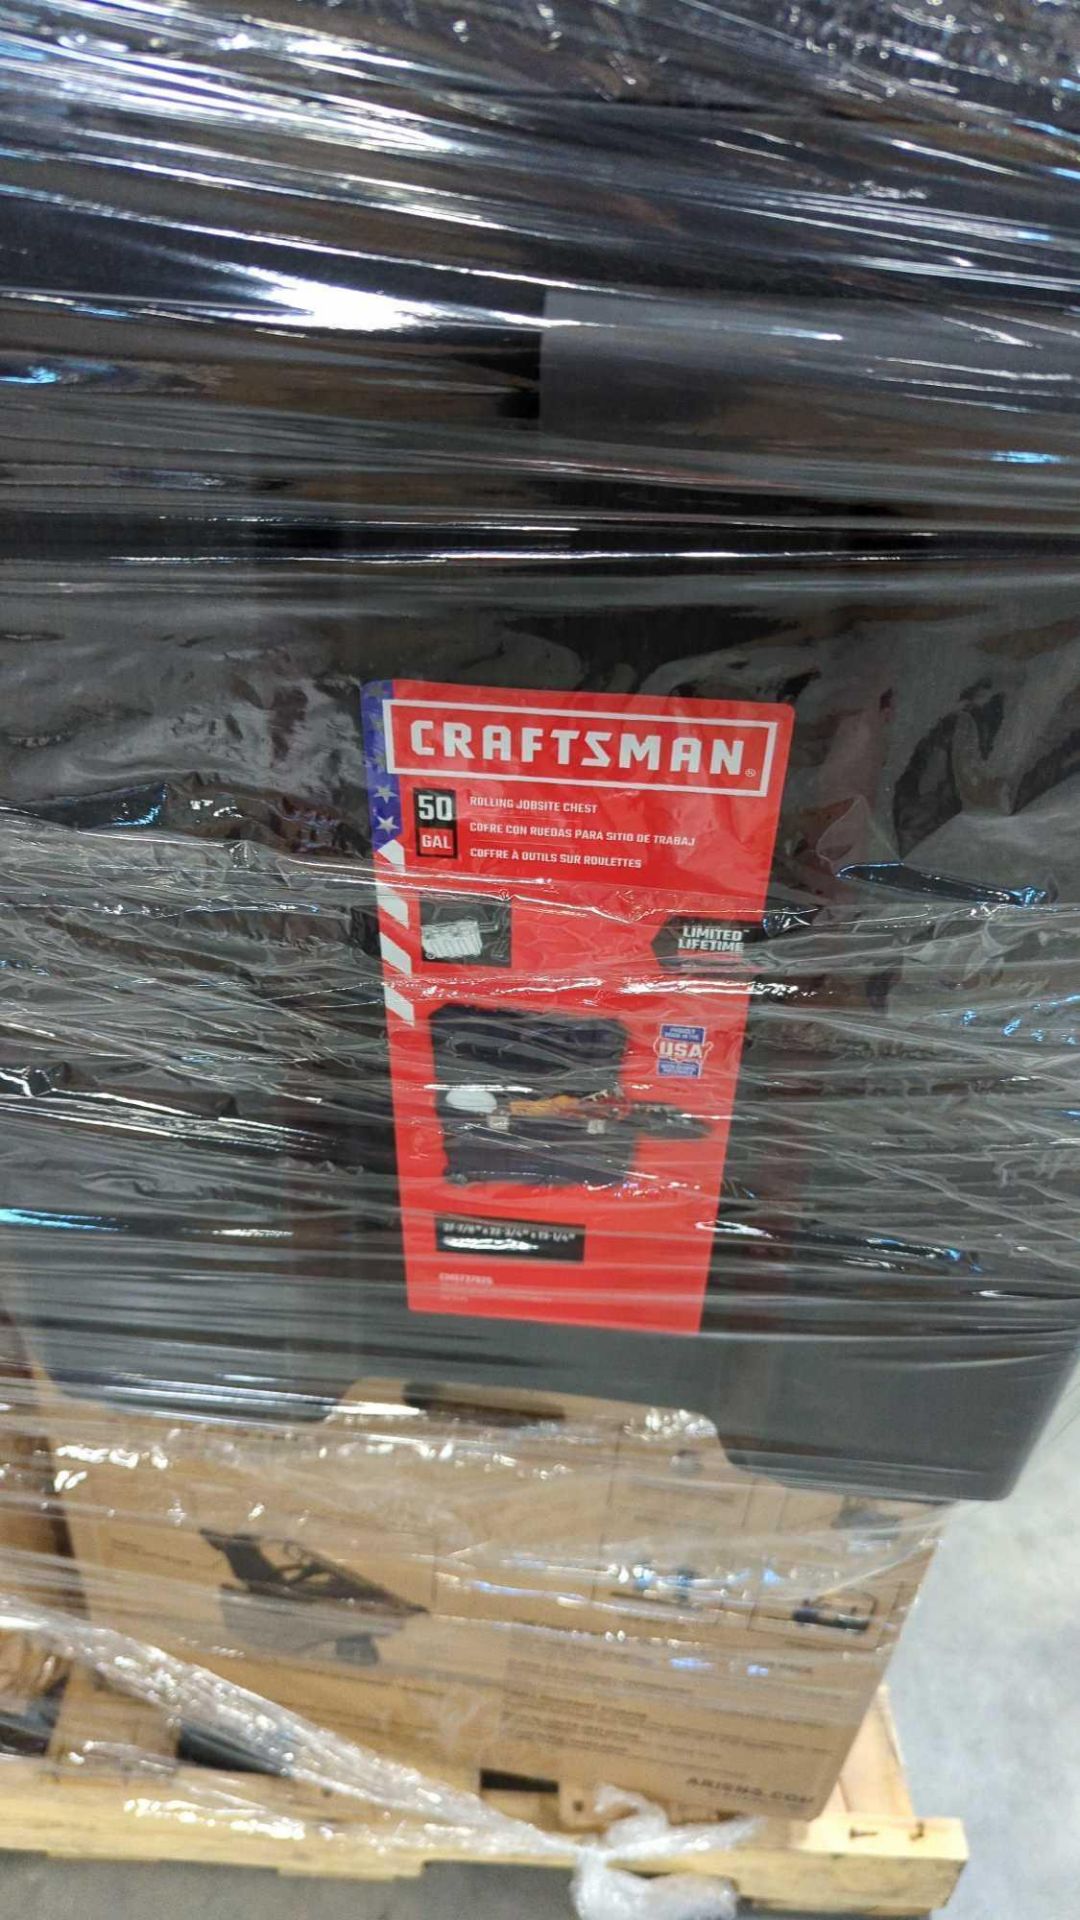 Craftsman tools and more - Image 4 of 7